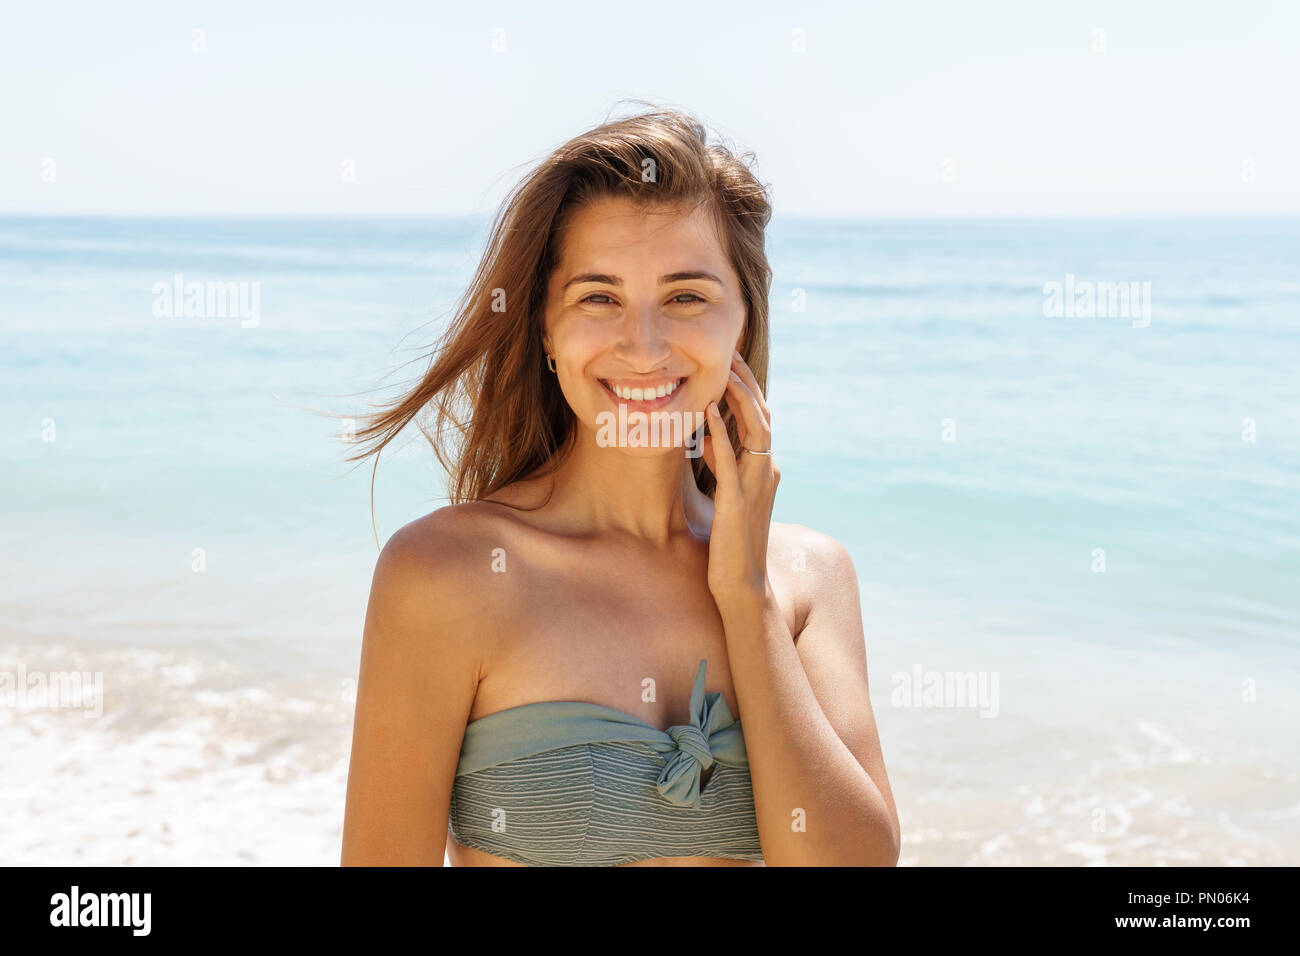 Beautiful Engaged Young Woman Portrait With Engagement Diamond Ring Feeling Happy On Beach Stock Photo